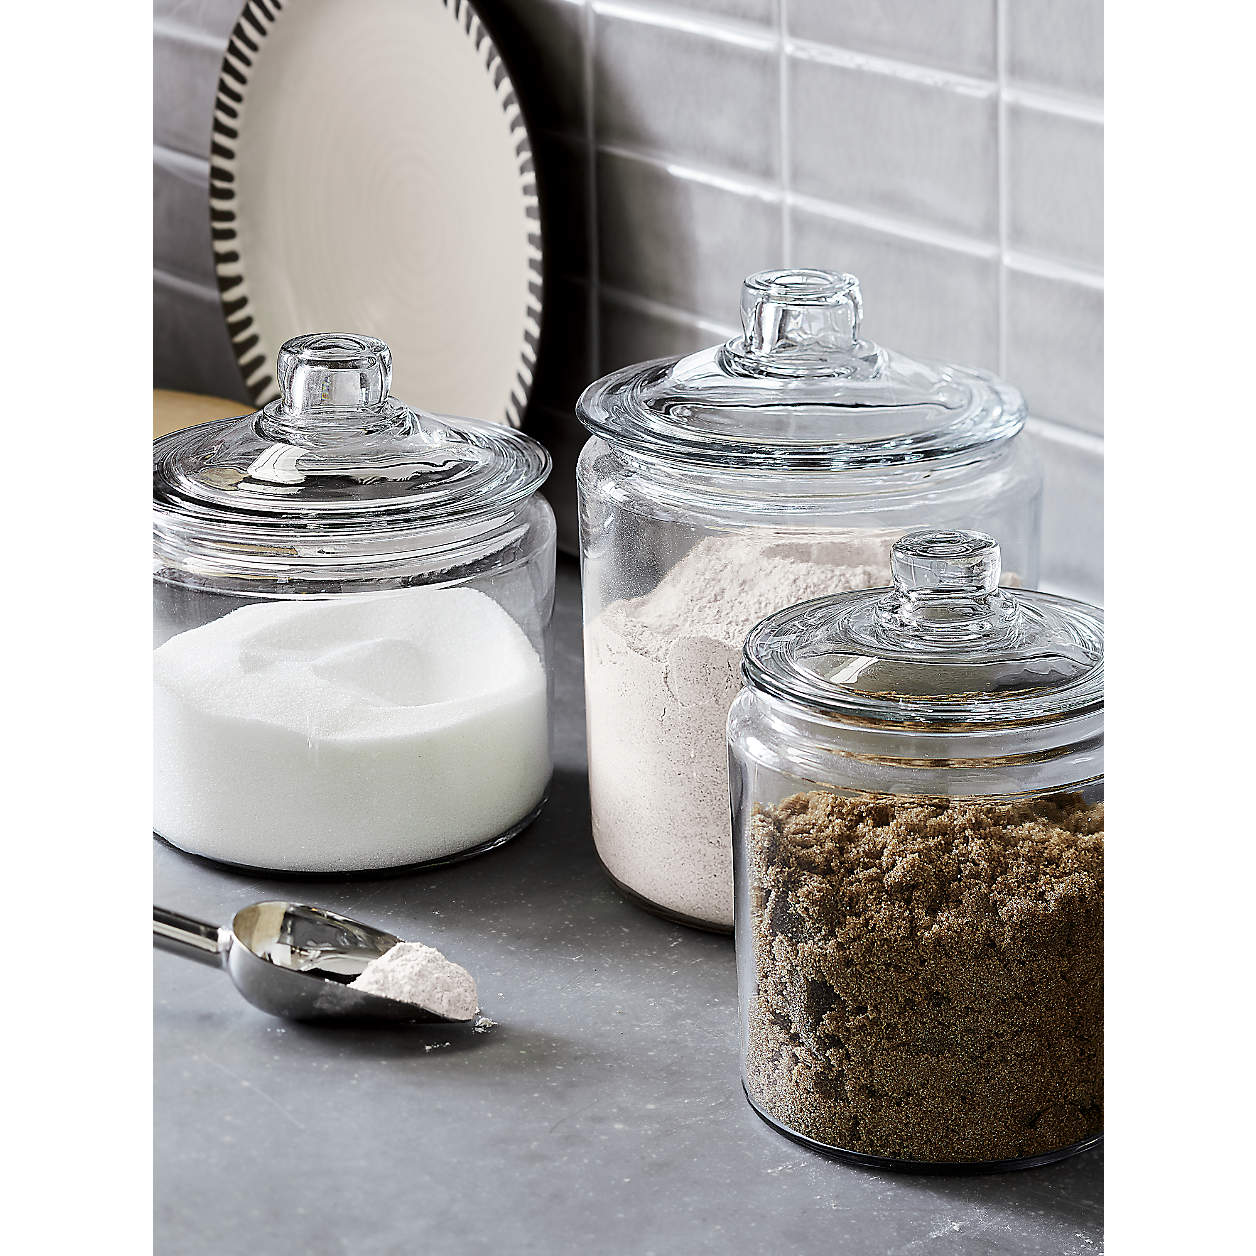 Anchor Hocking Glass Canisters with Glass Lids